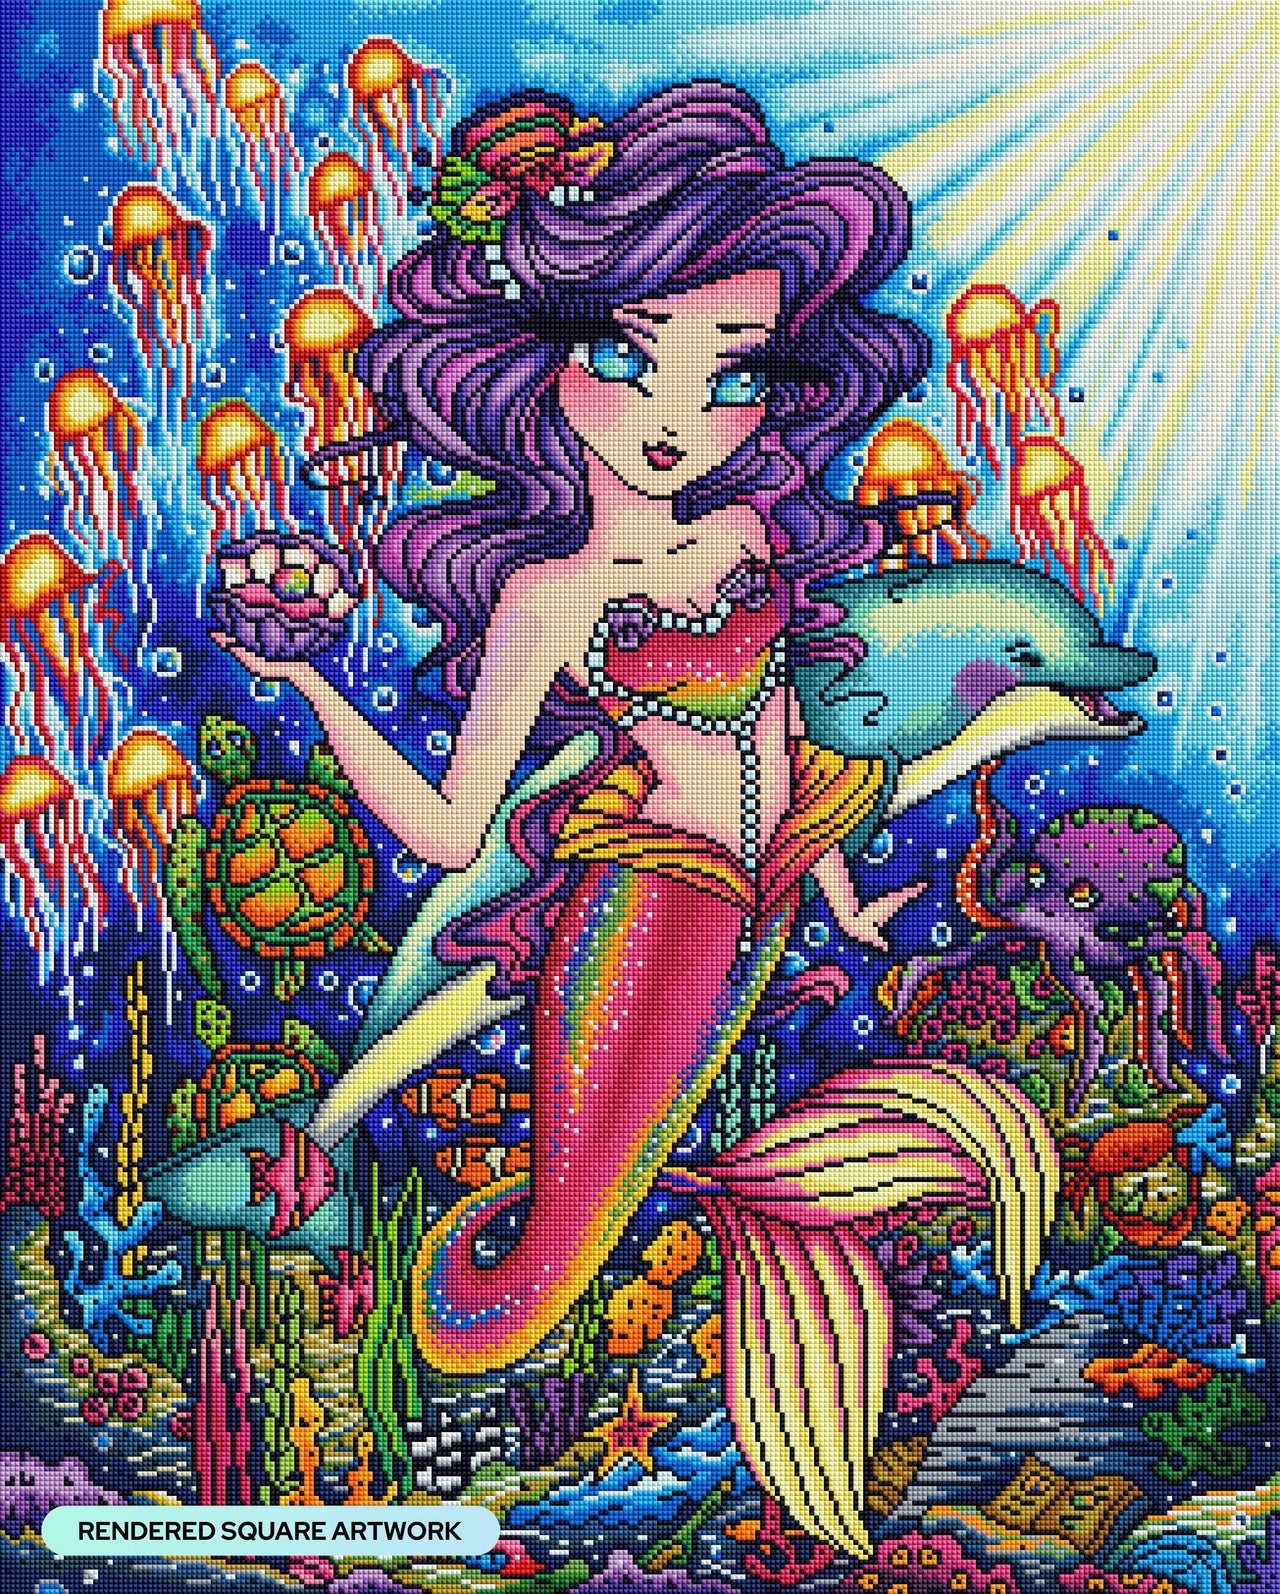 Diamond Painting Jewel of the Sea 23.6" x 31.9" (65cm x 81cm) / Square with 59 Colors including 4 ABs and 1 Fairy Dust Diamonds / 84,825